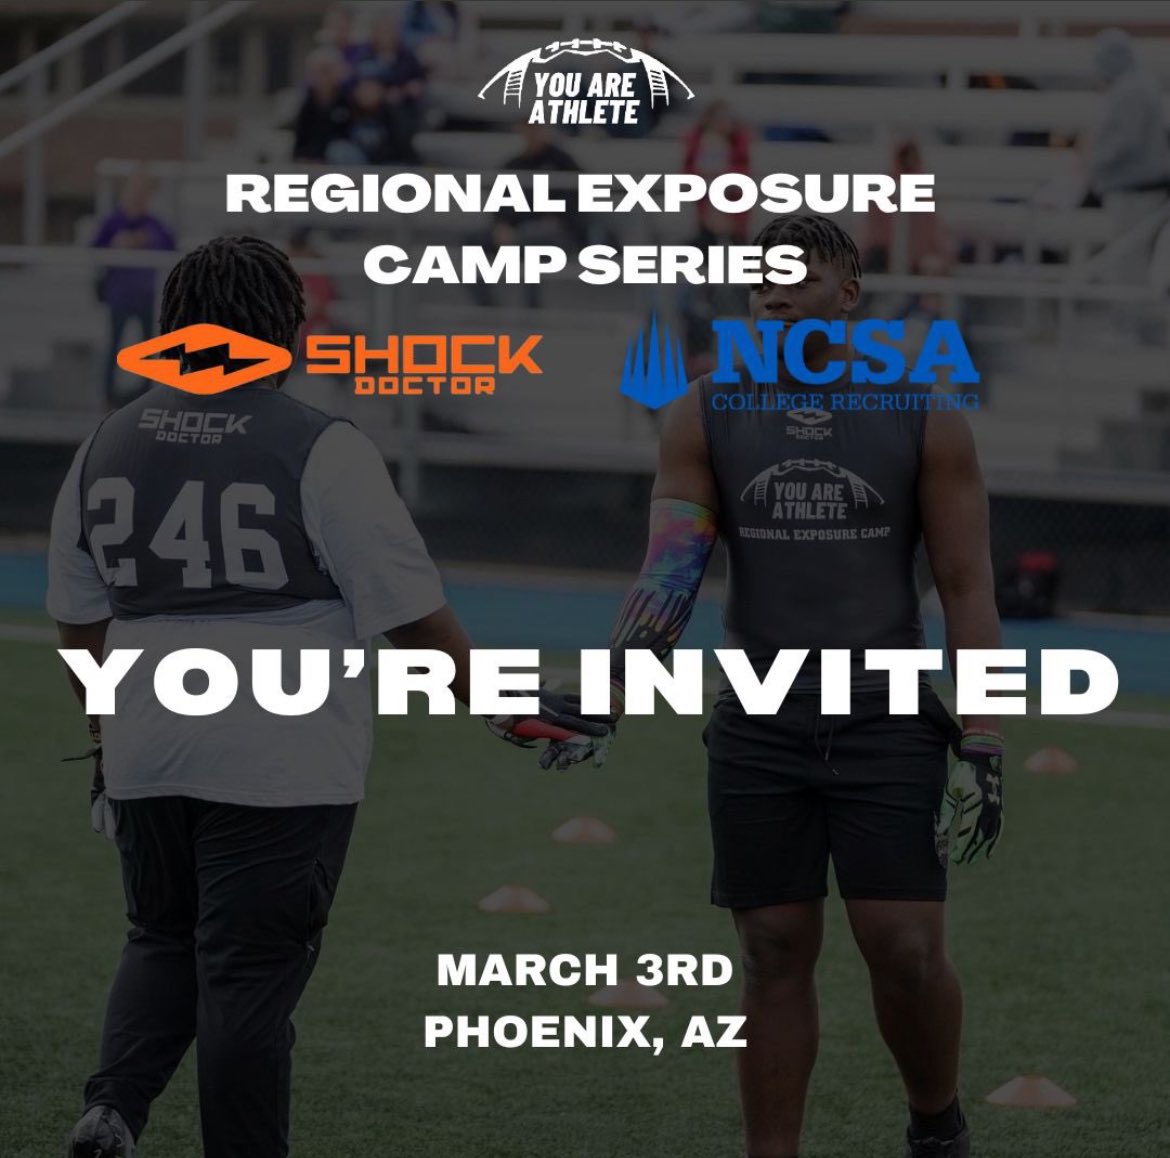 Blessed to receive an invite. @youareathlete @ShockDoctor